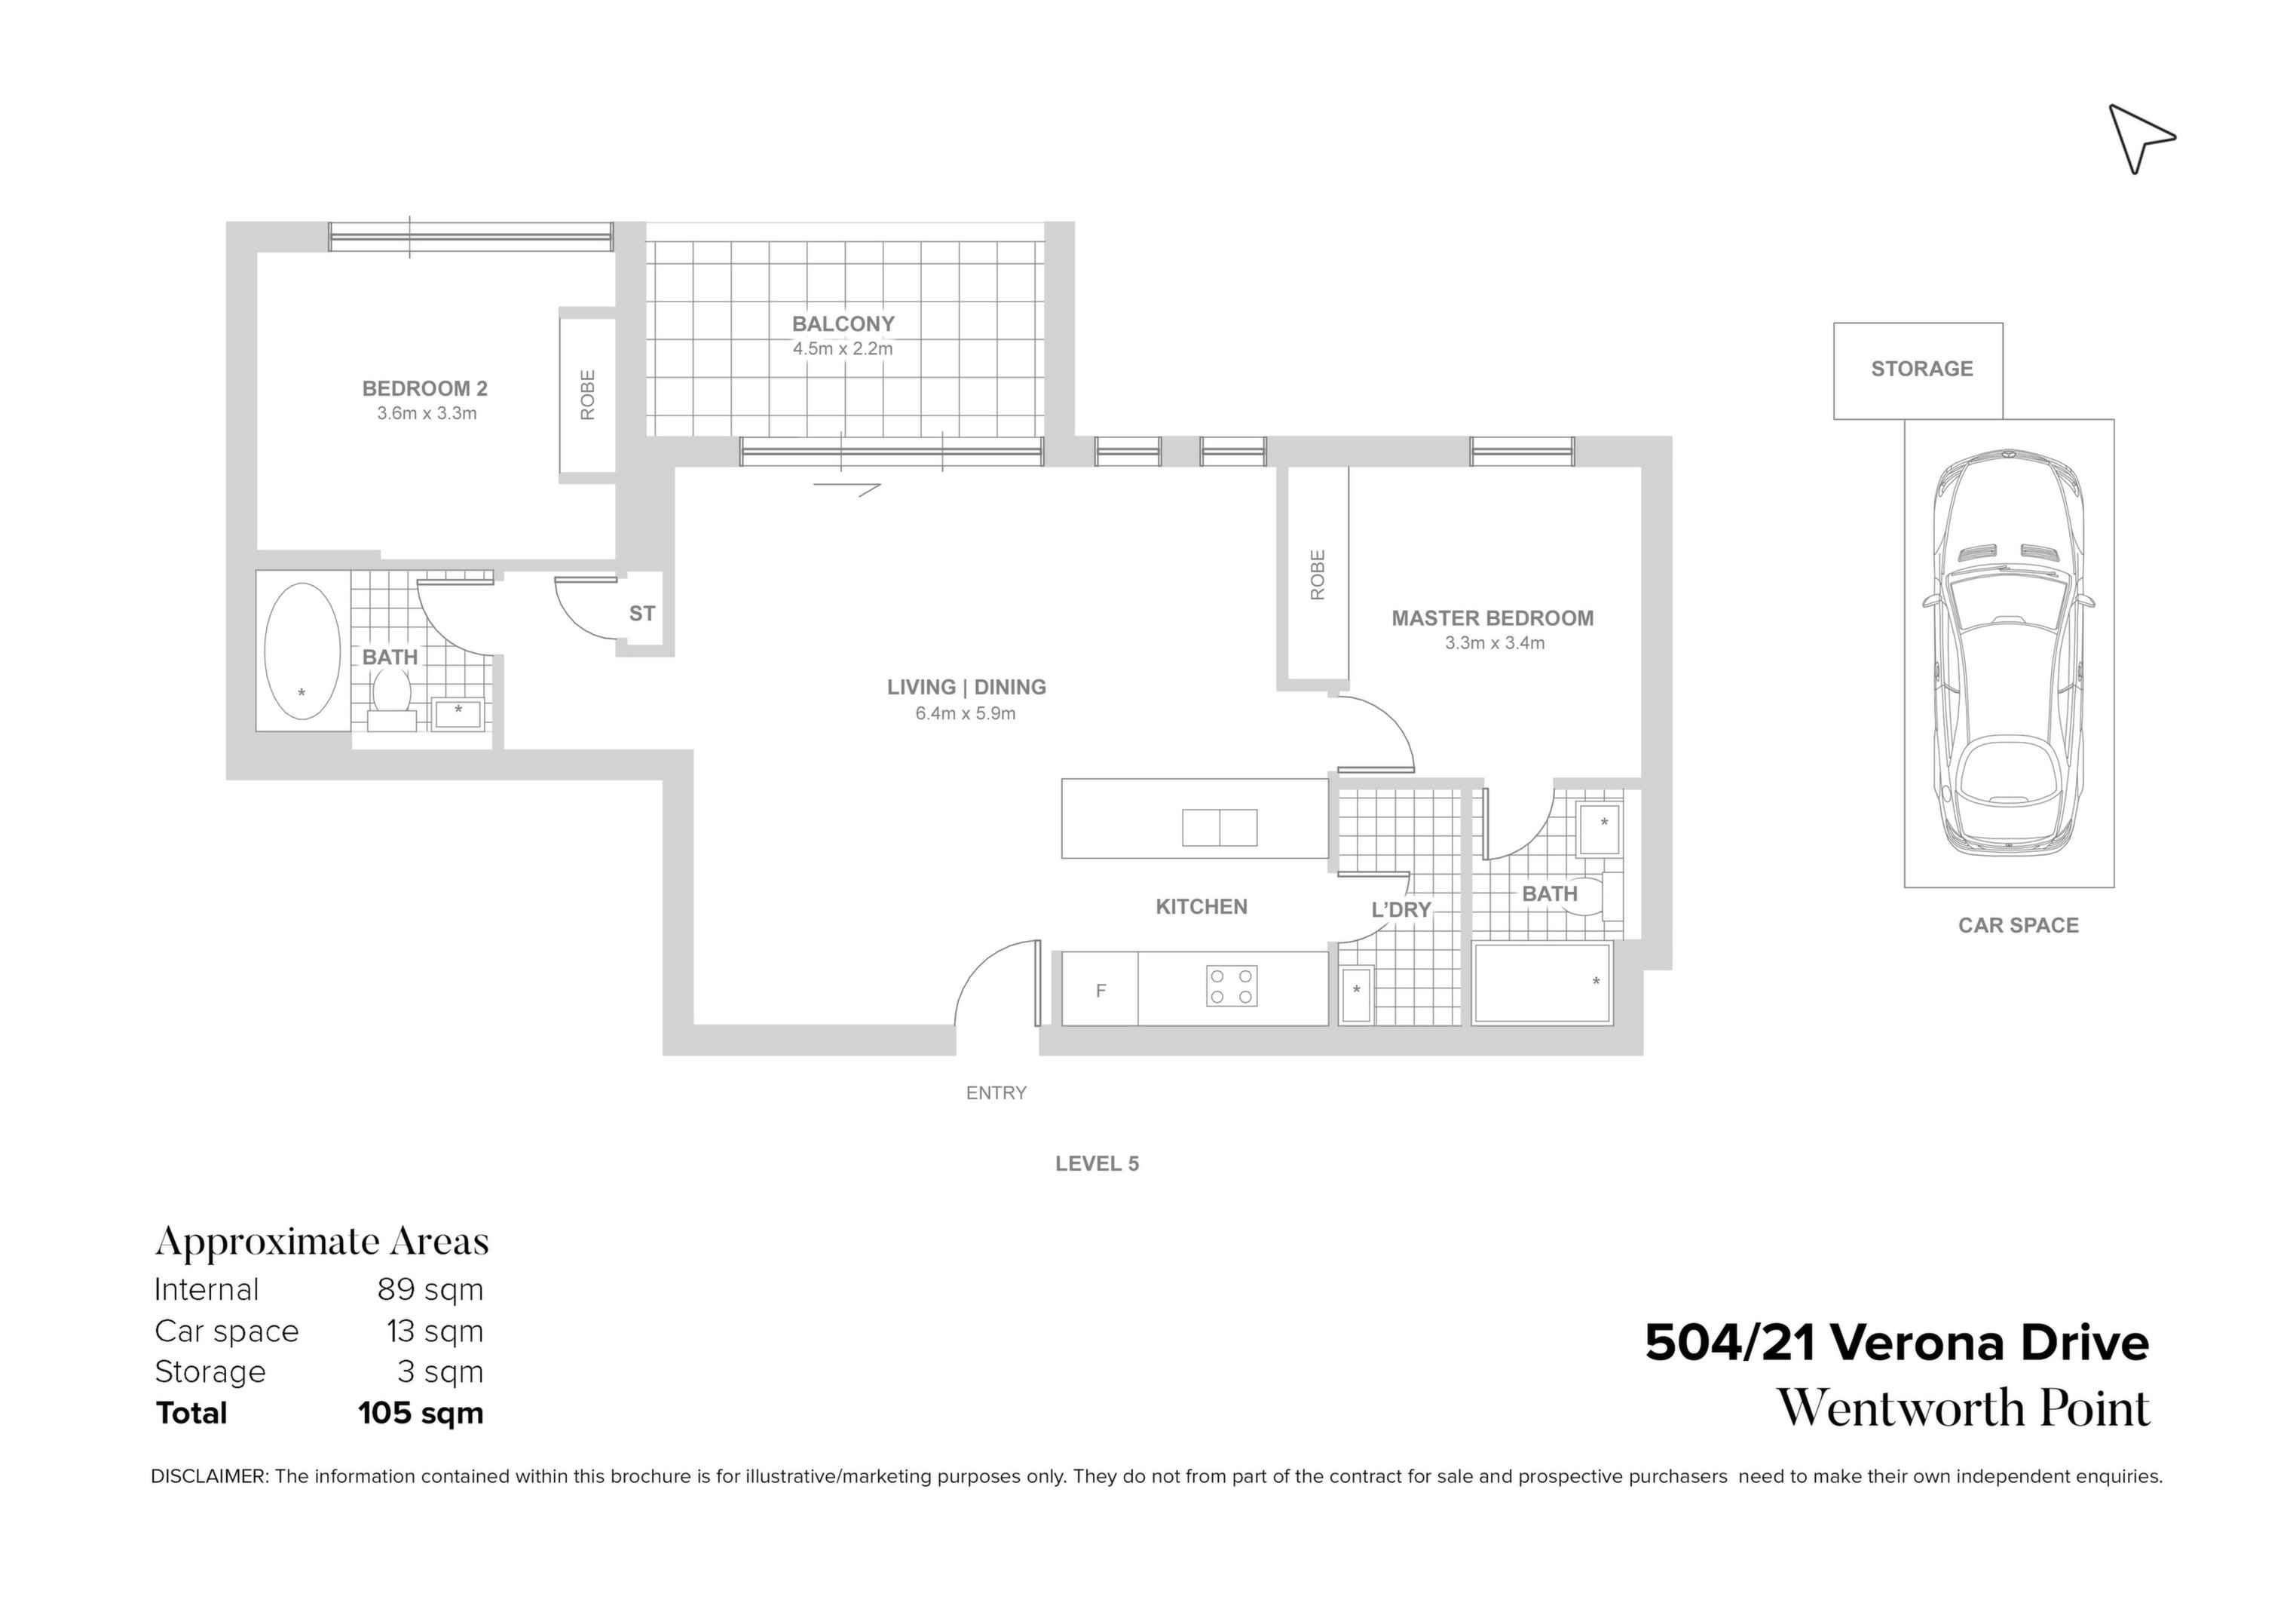 504/21 Verona Drive, Wentworth Point Sold by Chidiac Realty - floorplan